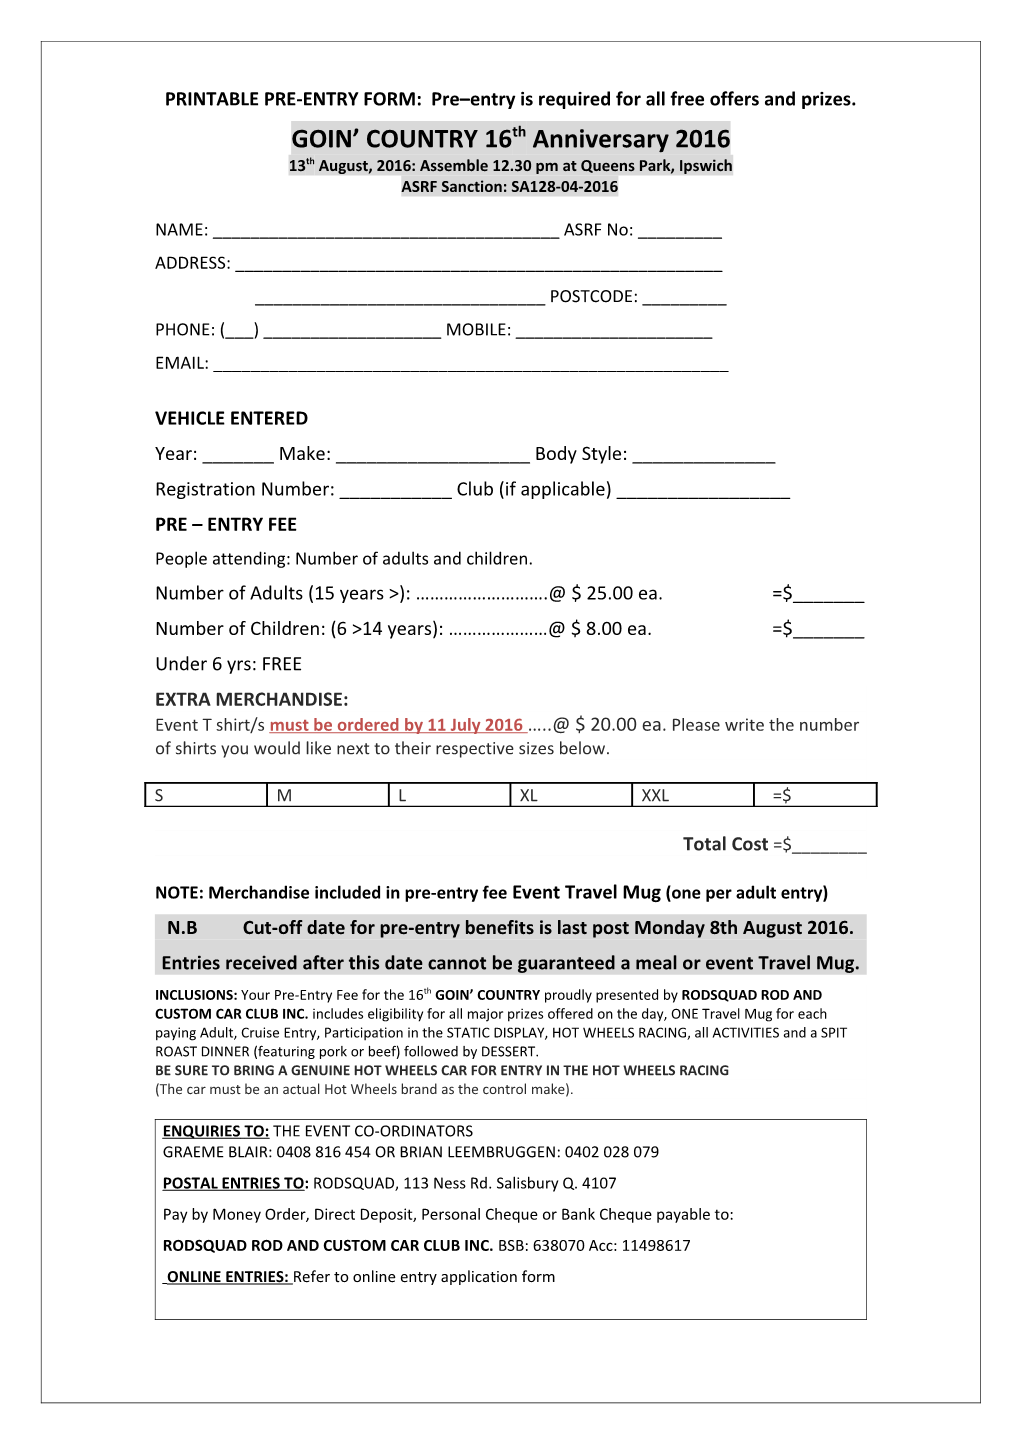 PRINTABLE PRE-ENTRY FORM: Pre Entry Is Required for All Free Offers and Prizes